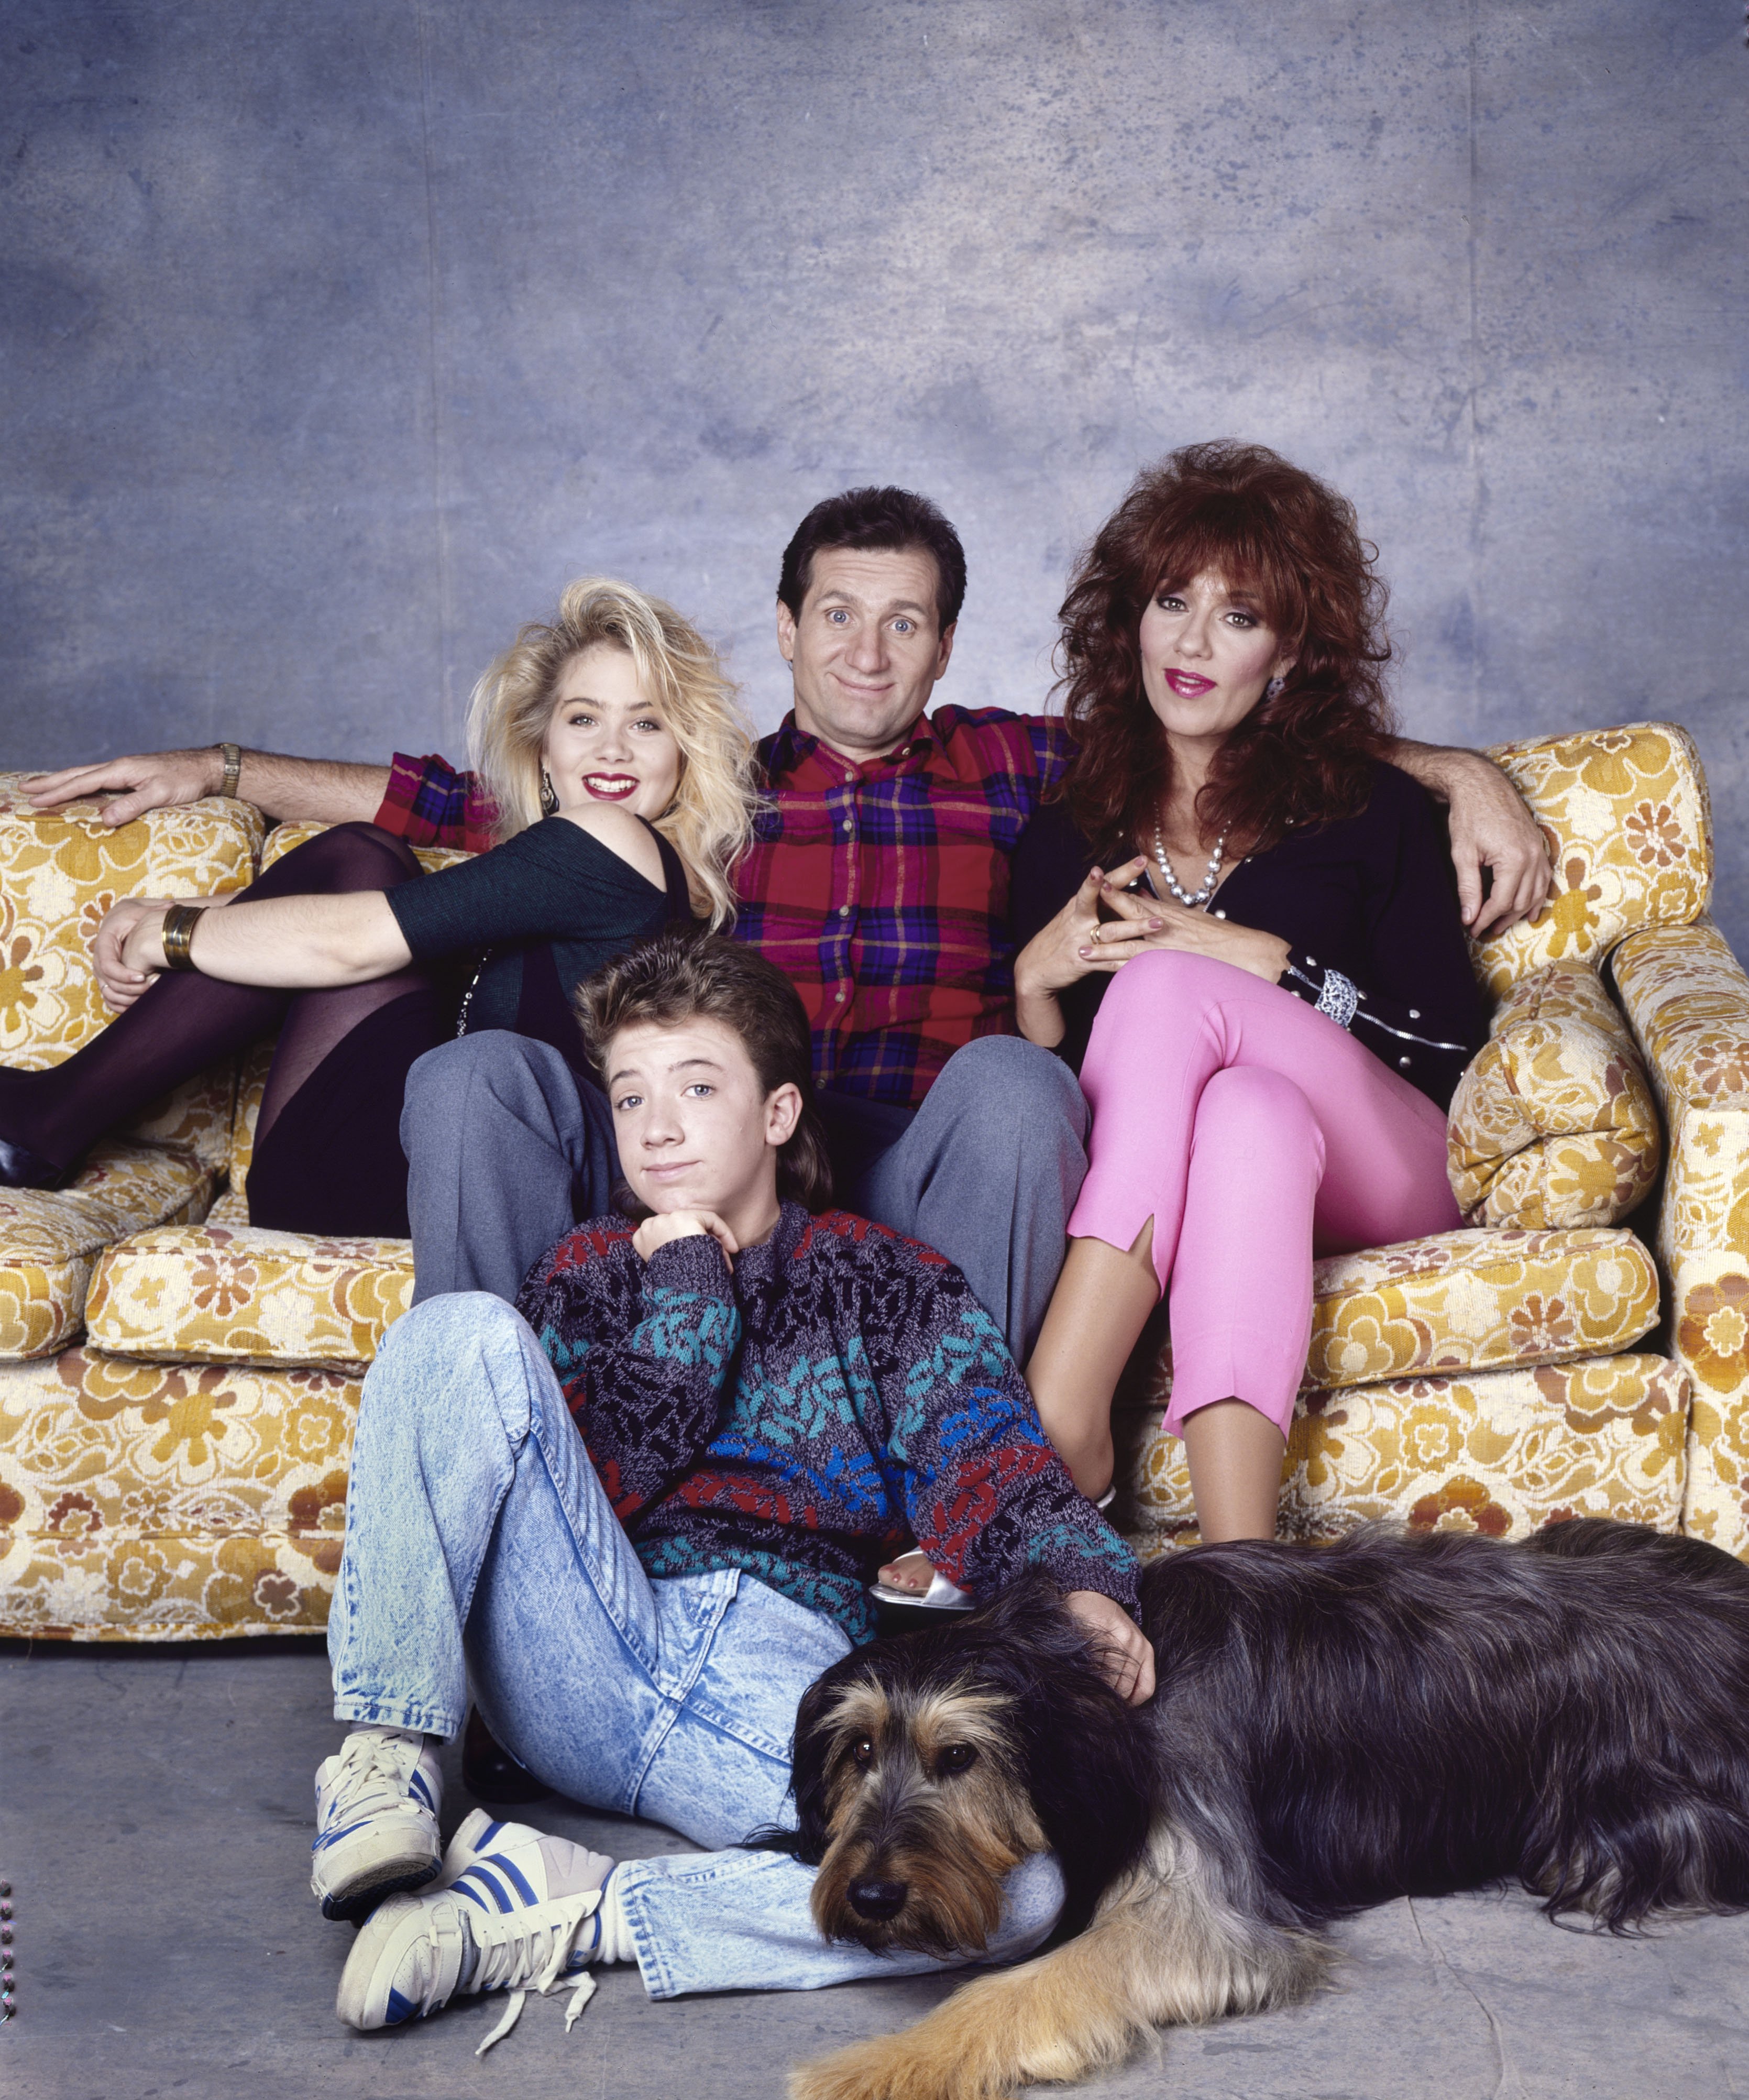 Christina Applegate, David Faustino, Ed O'Neill, and Katey Sagal in October 1988 in Los Angeles, California | Source: Getty Images